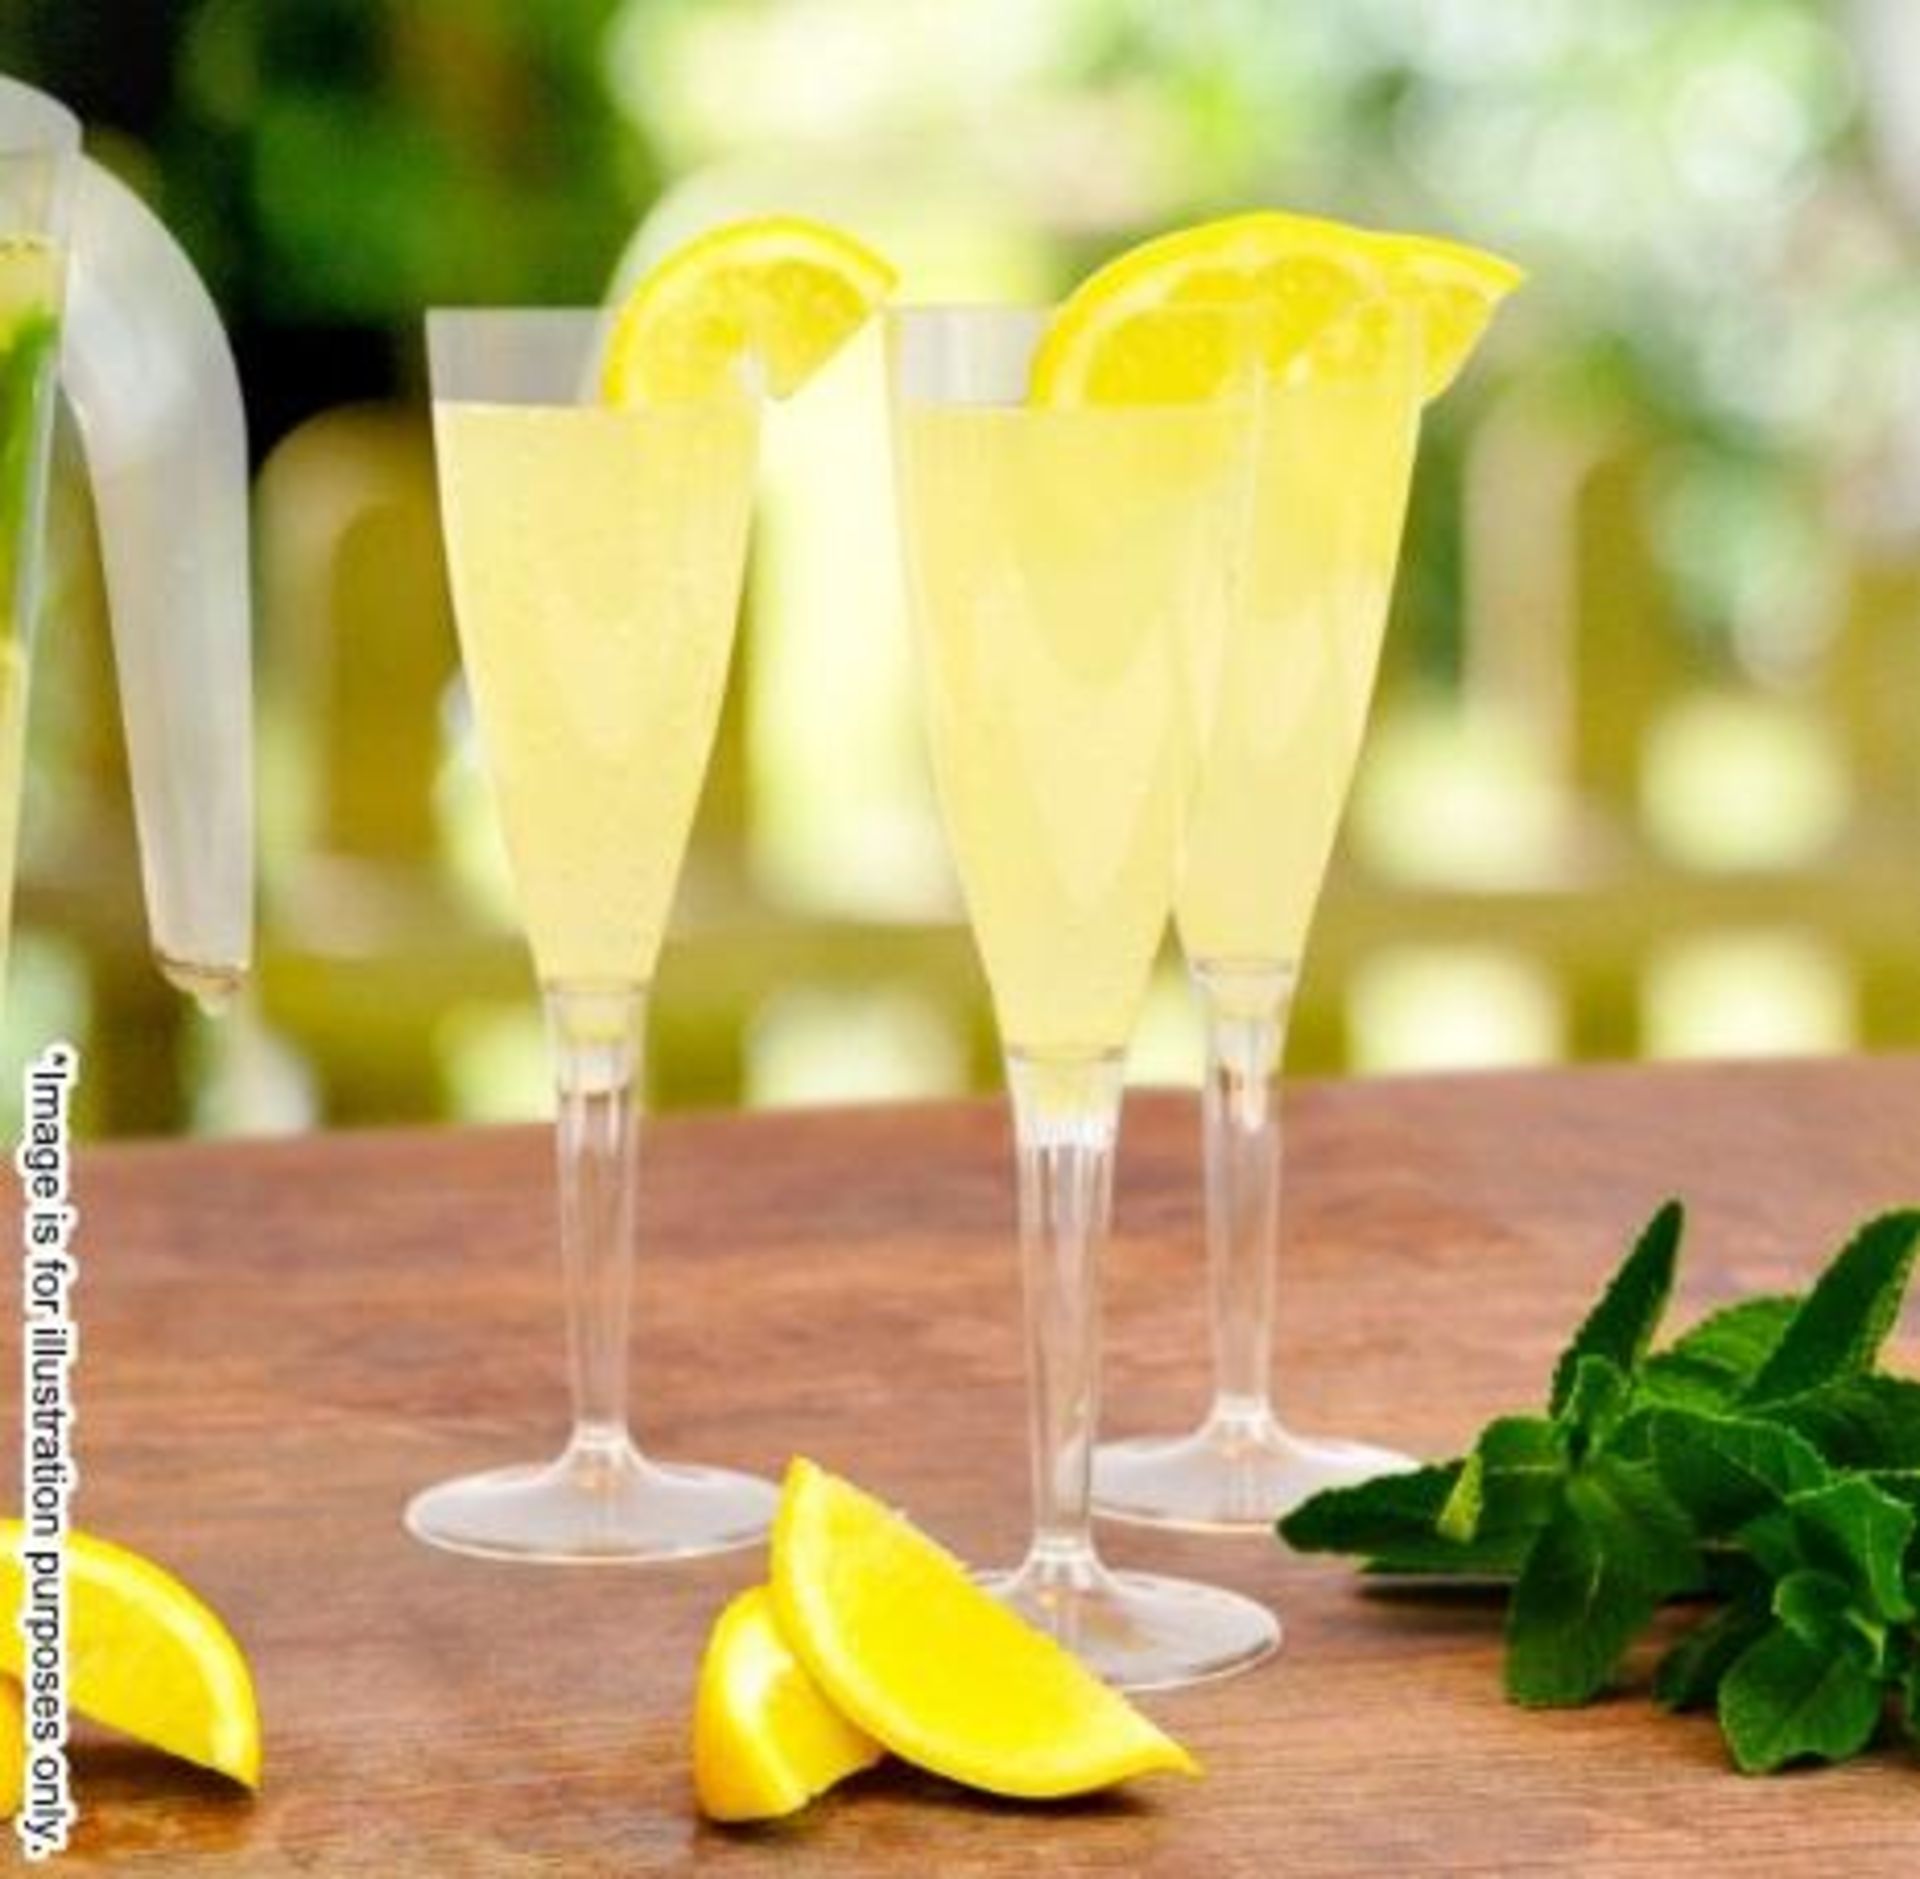 400 x Disposable Clear Plastic Champagne Flutes (170ml) - Brand: Remmerco CG111P - Recently